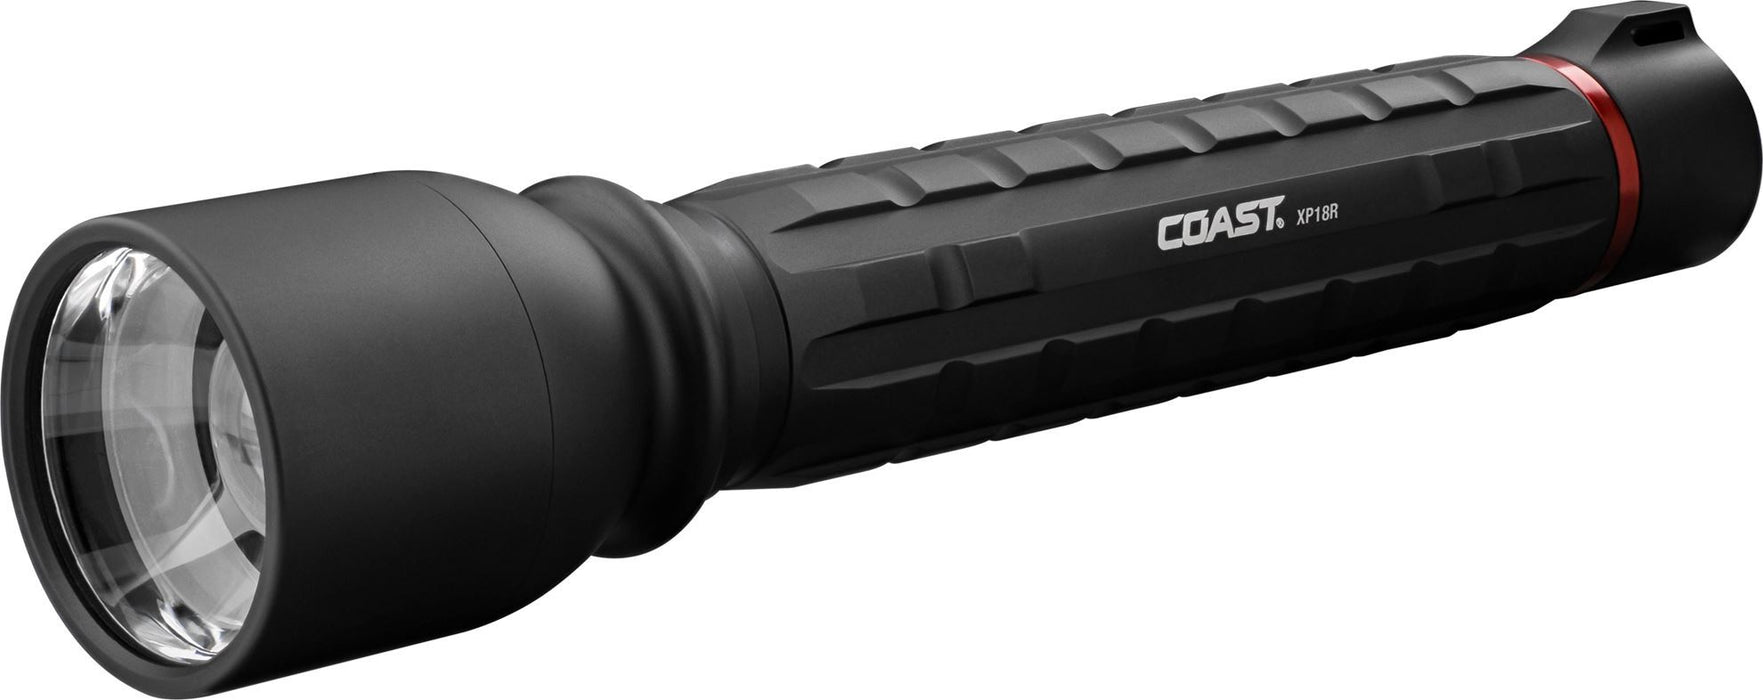 COAST LED Dual-Power Rechargeable Torch with Slide Focus. 3650 Lumens IP54 Water